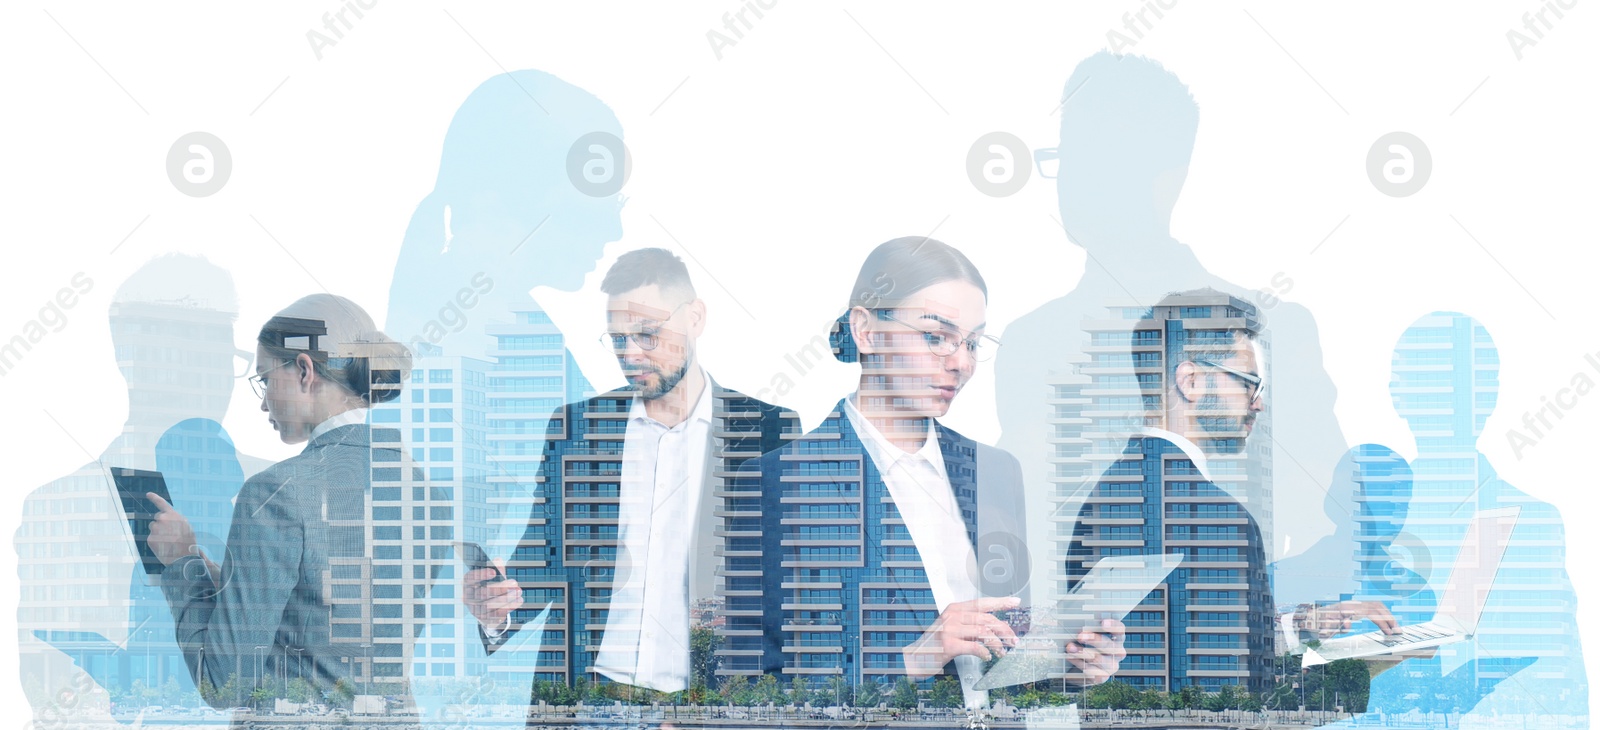 Image of Forex trading. Double exposure of business people with gadgets and cityscape, banner design